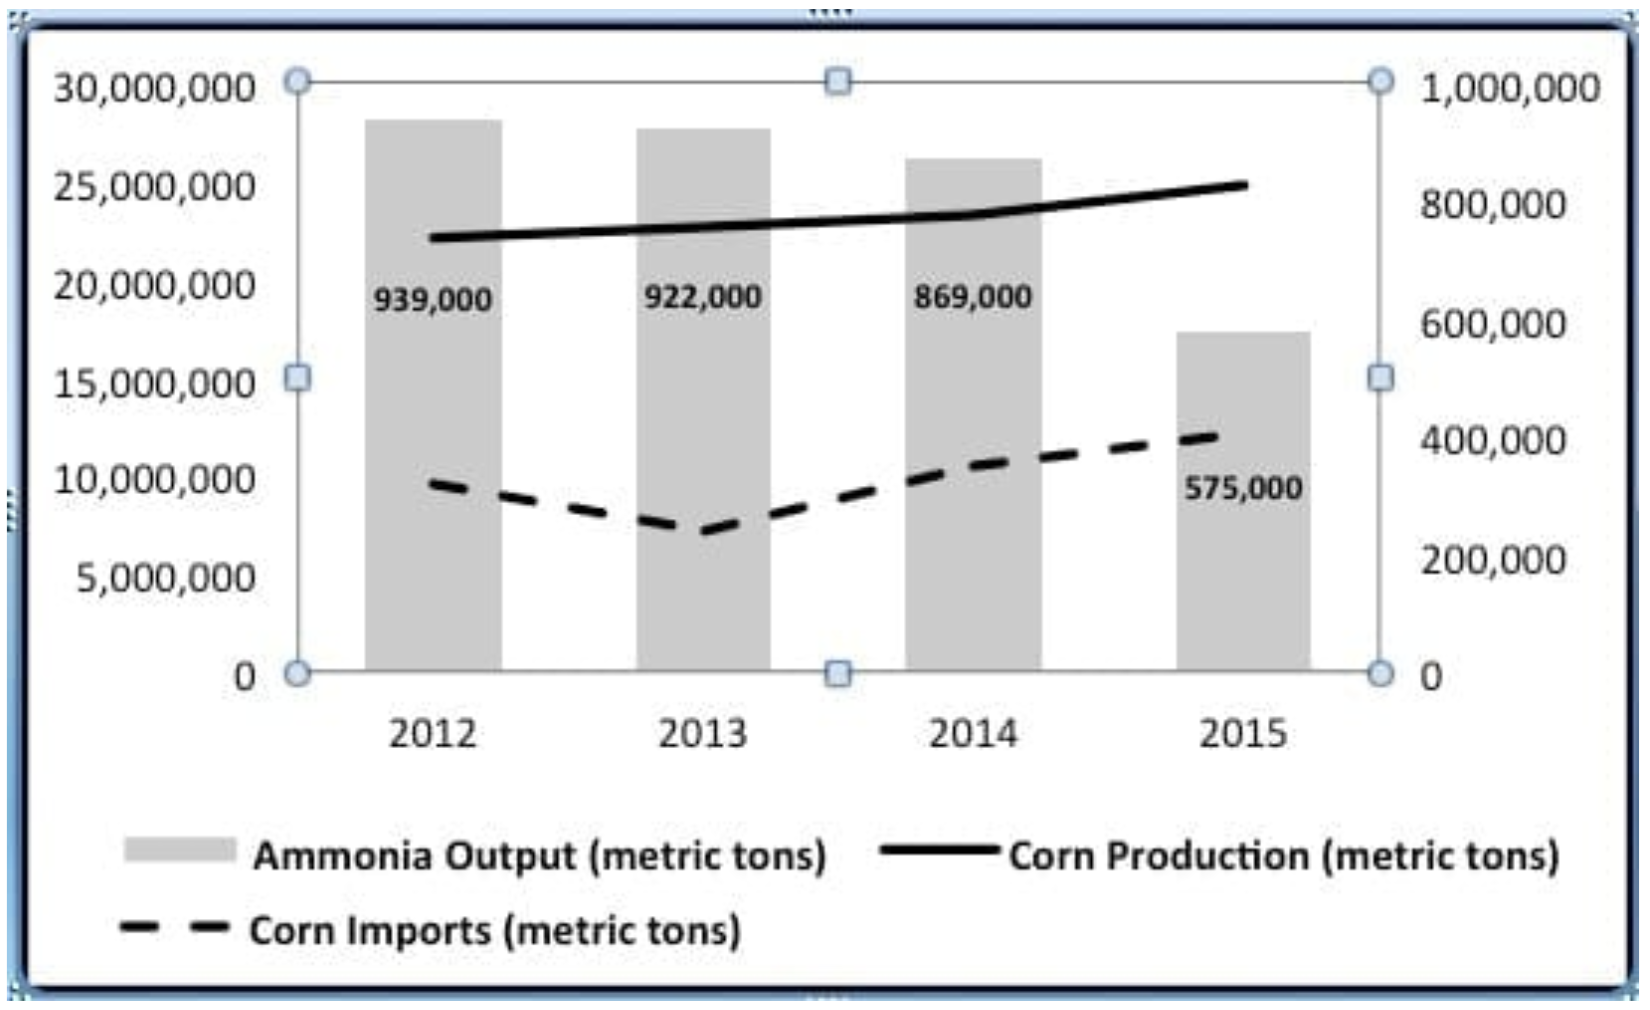 This graph compares corn and ammonia production between 2012 and 2015.